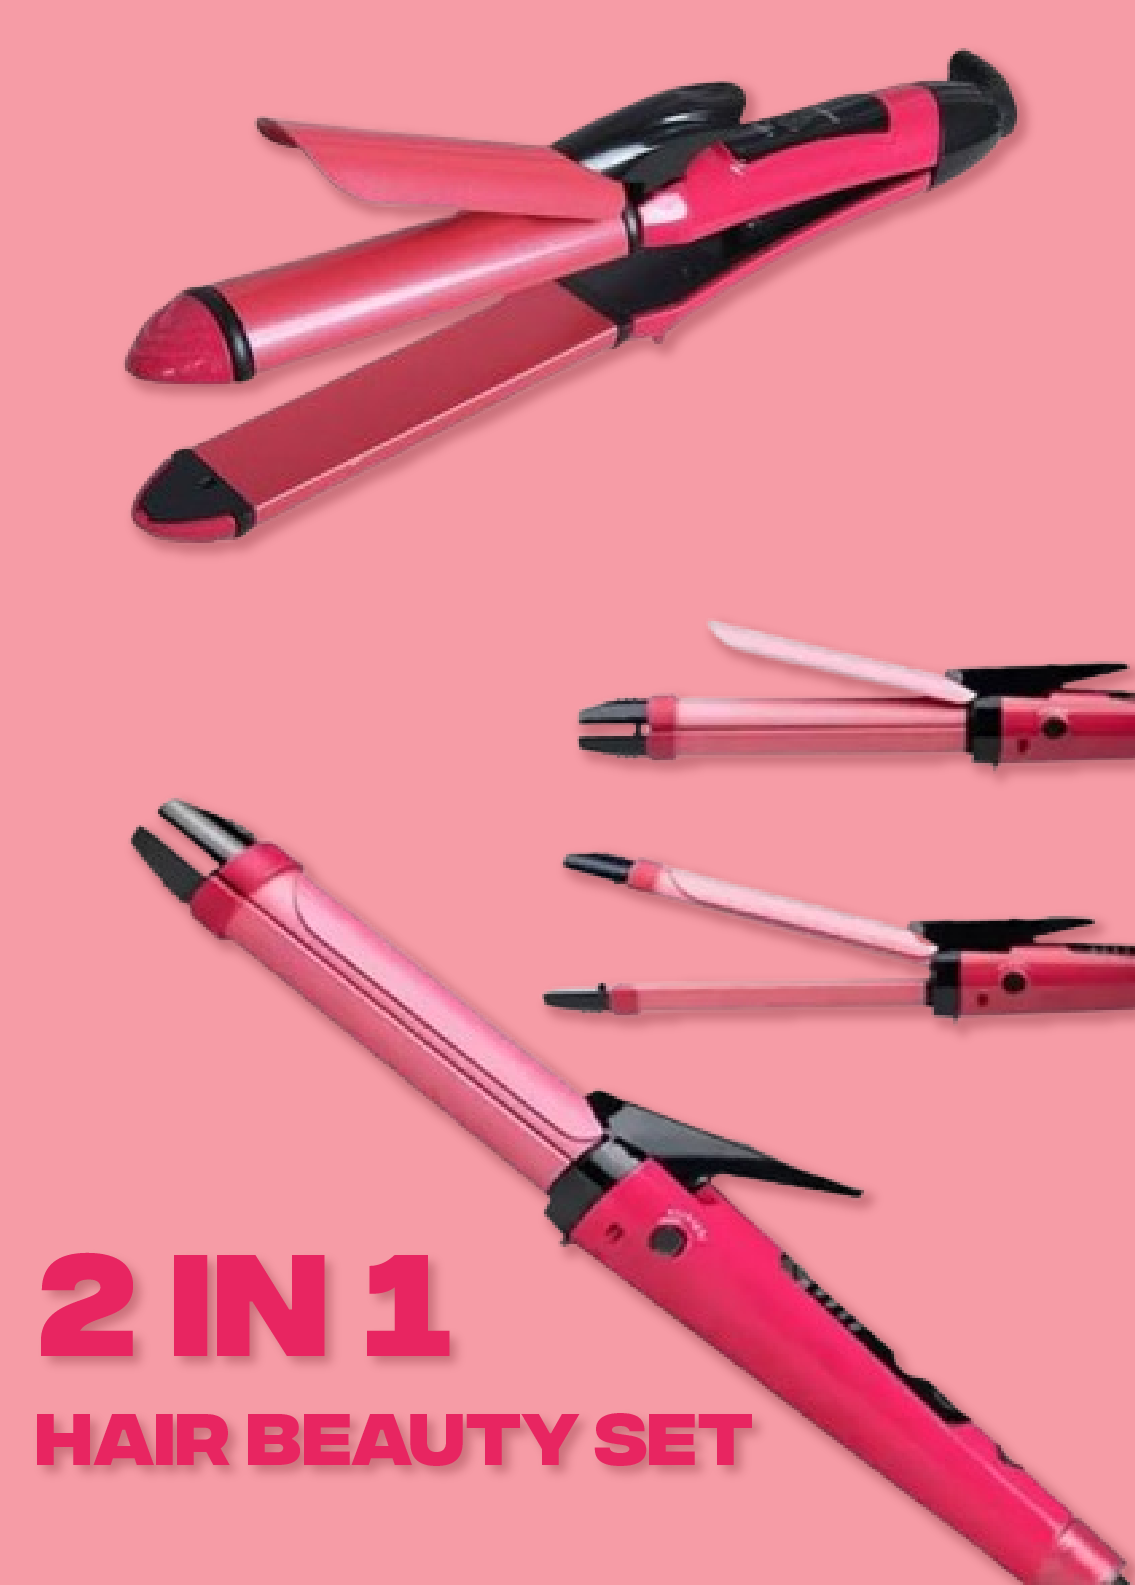 2-in-1 Curling Iron and Straightener by NOVA